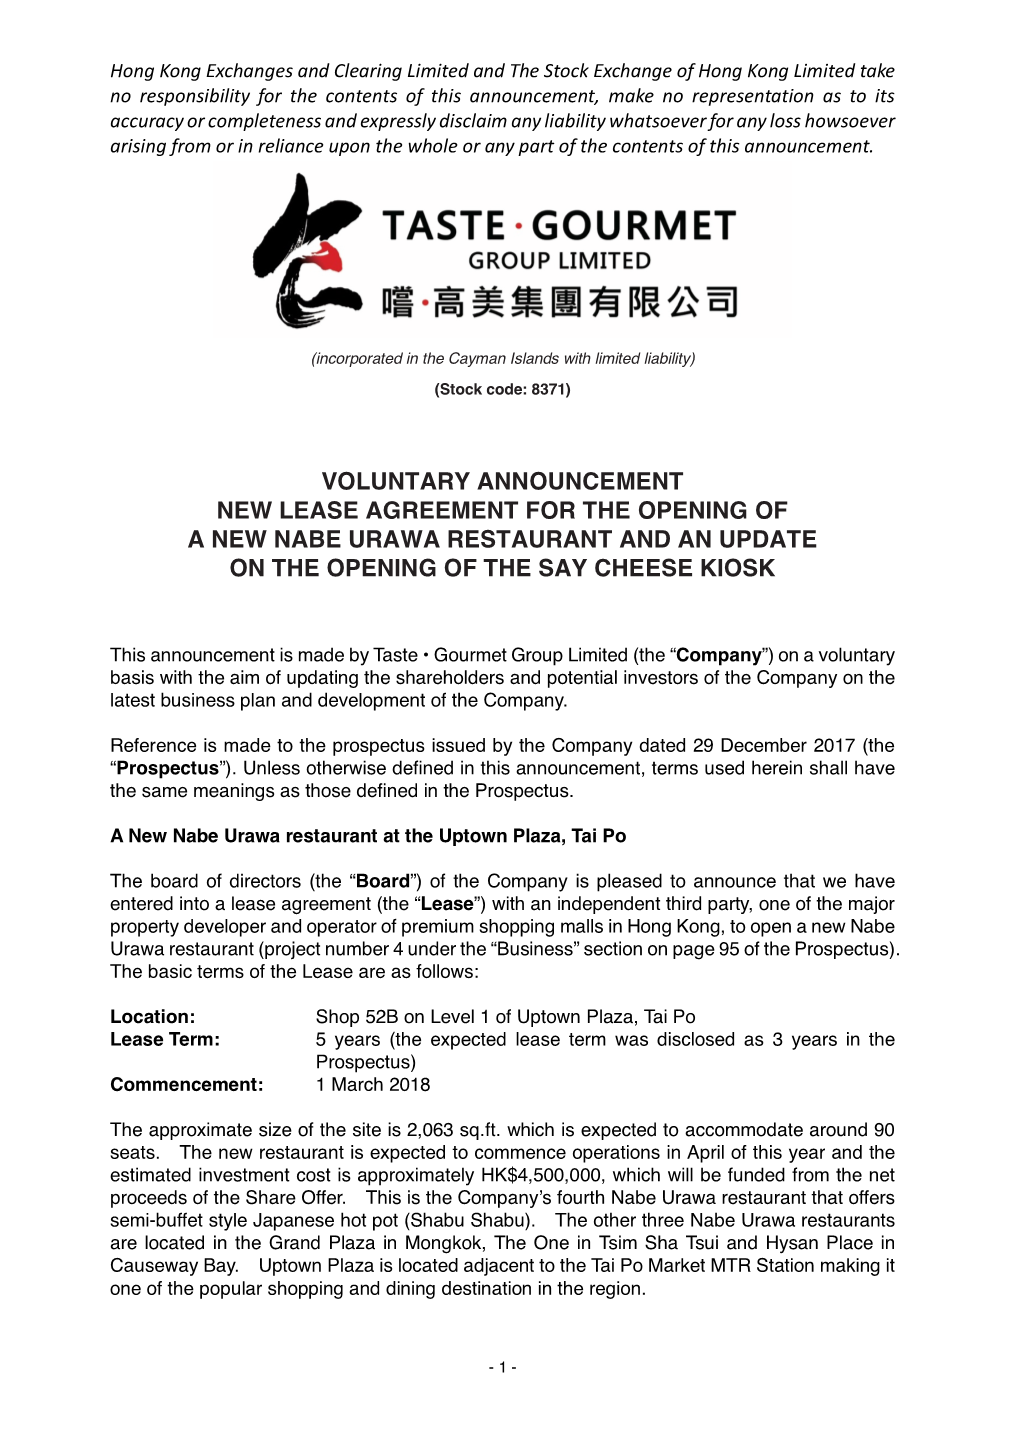 Voluntary Announcement New Lease Agreement for the Opening of a New Nabe Urawa Restaurant and an Update on the Opening of the Say Cheese Kiosk